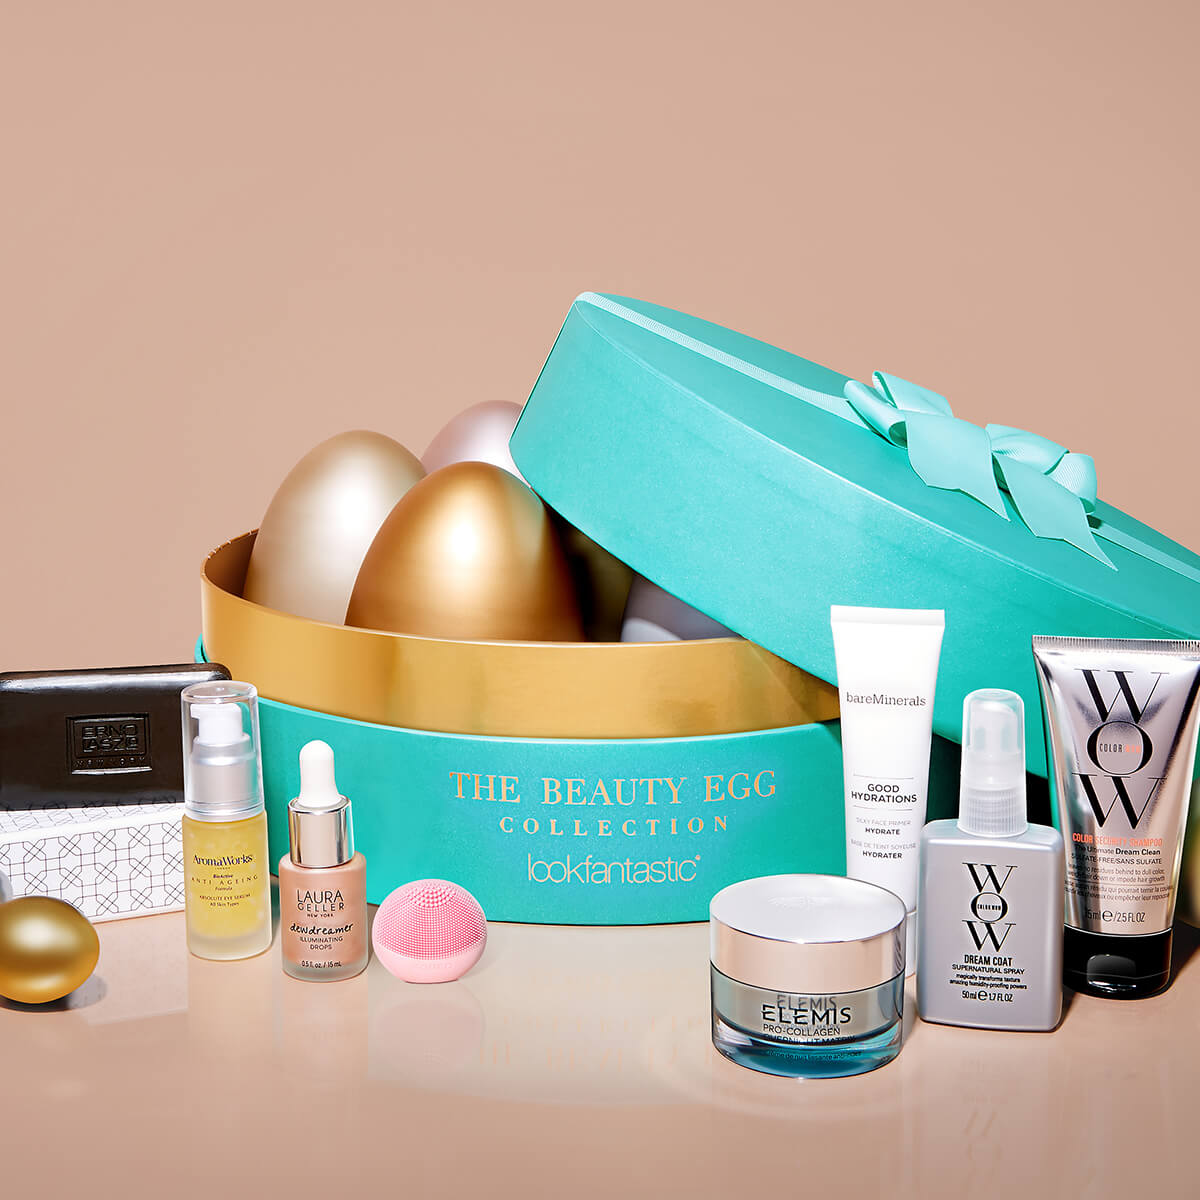 Beauty Egg collection 2019 look fantastic